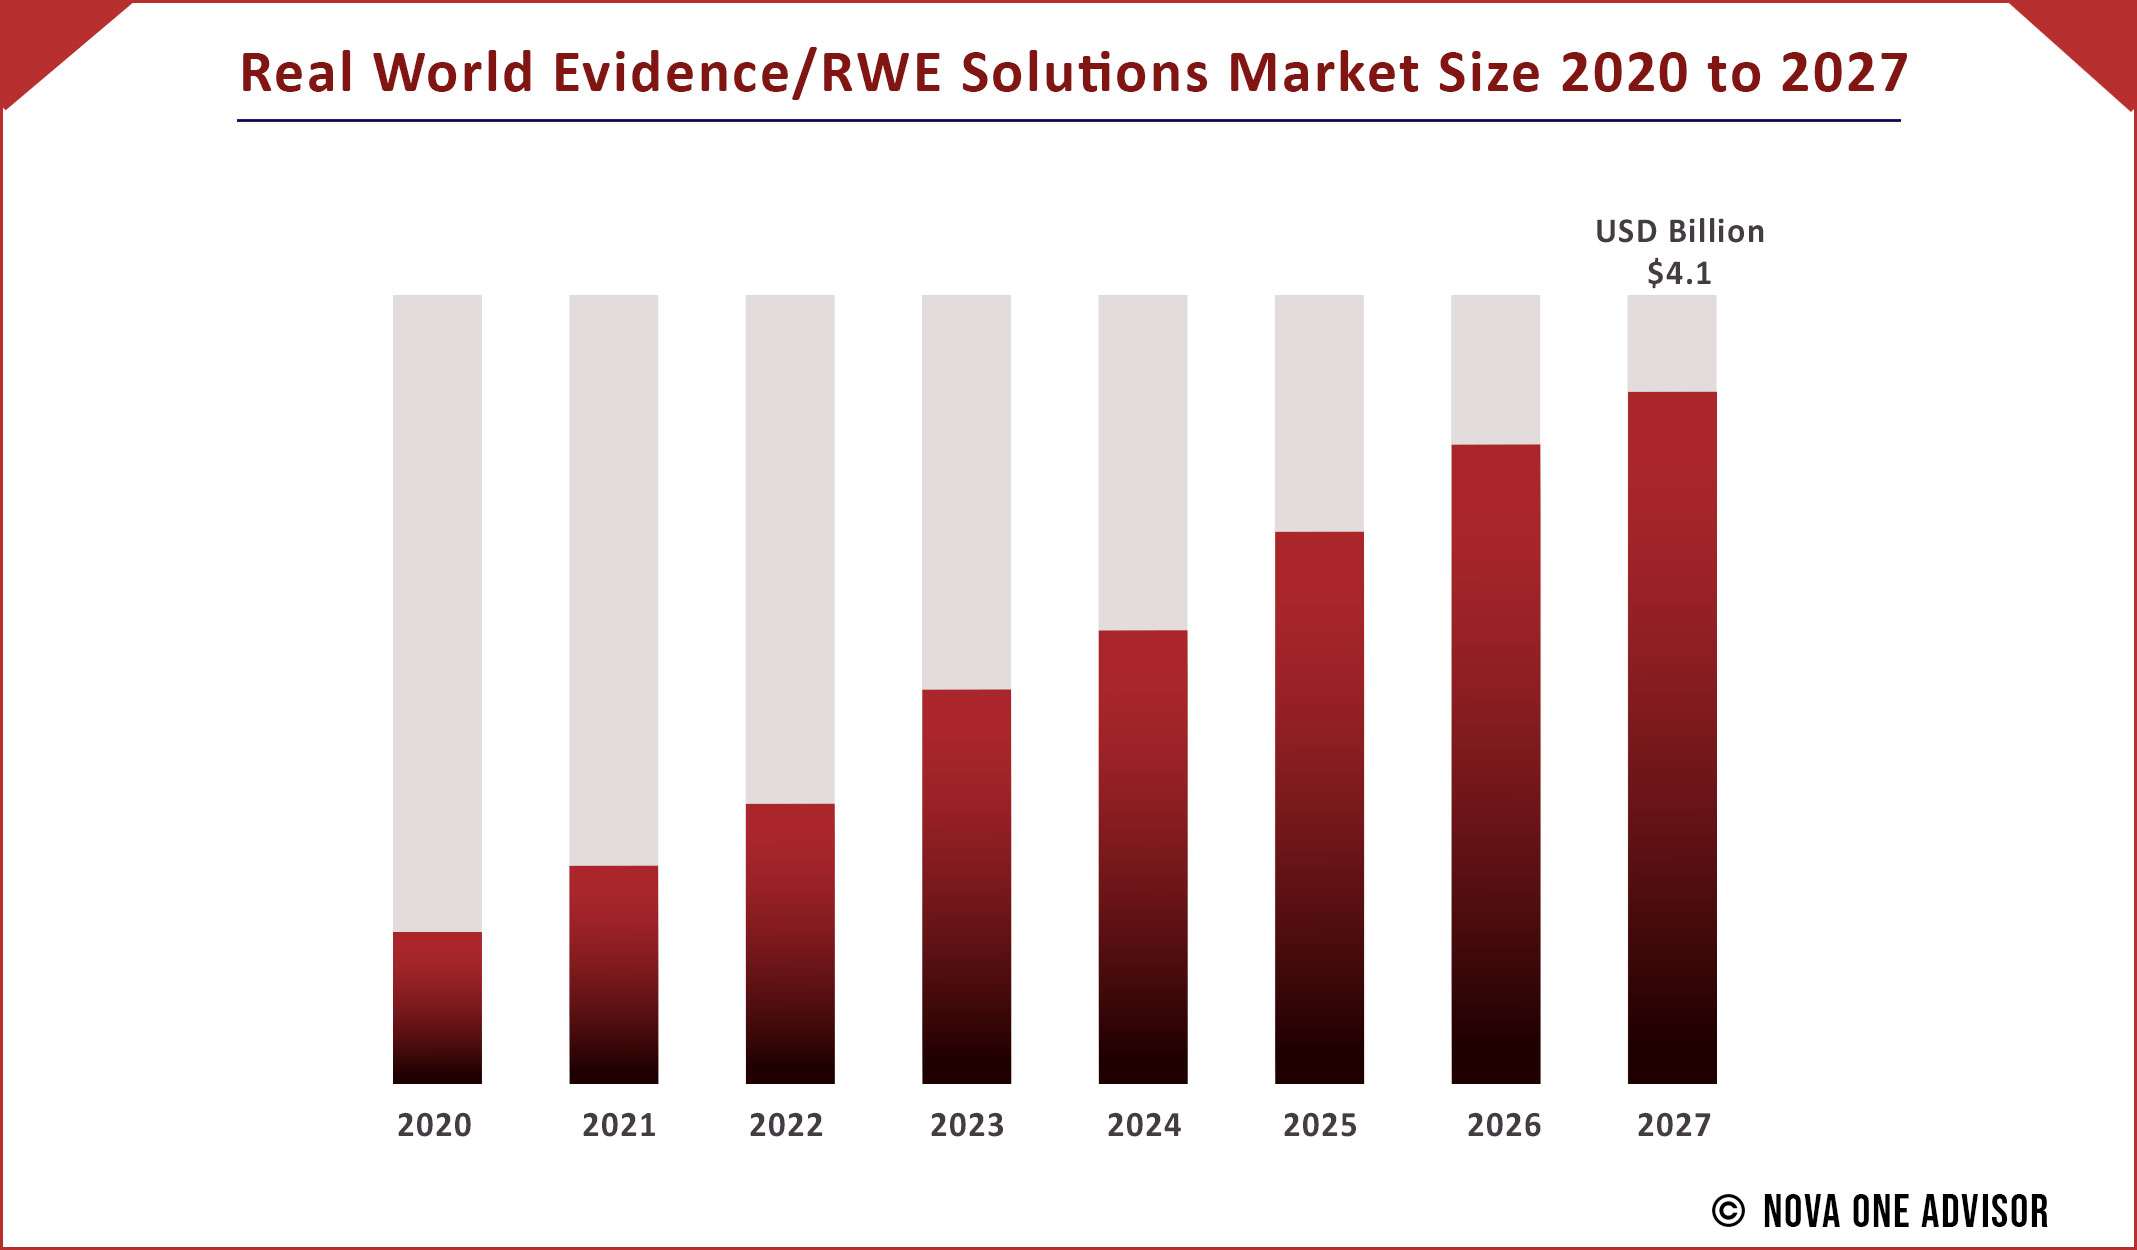 Real World Evidence/RWE Solutions Market Size 2020 to 2027